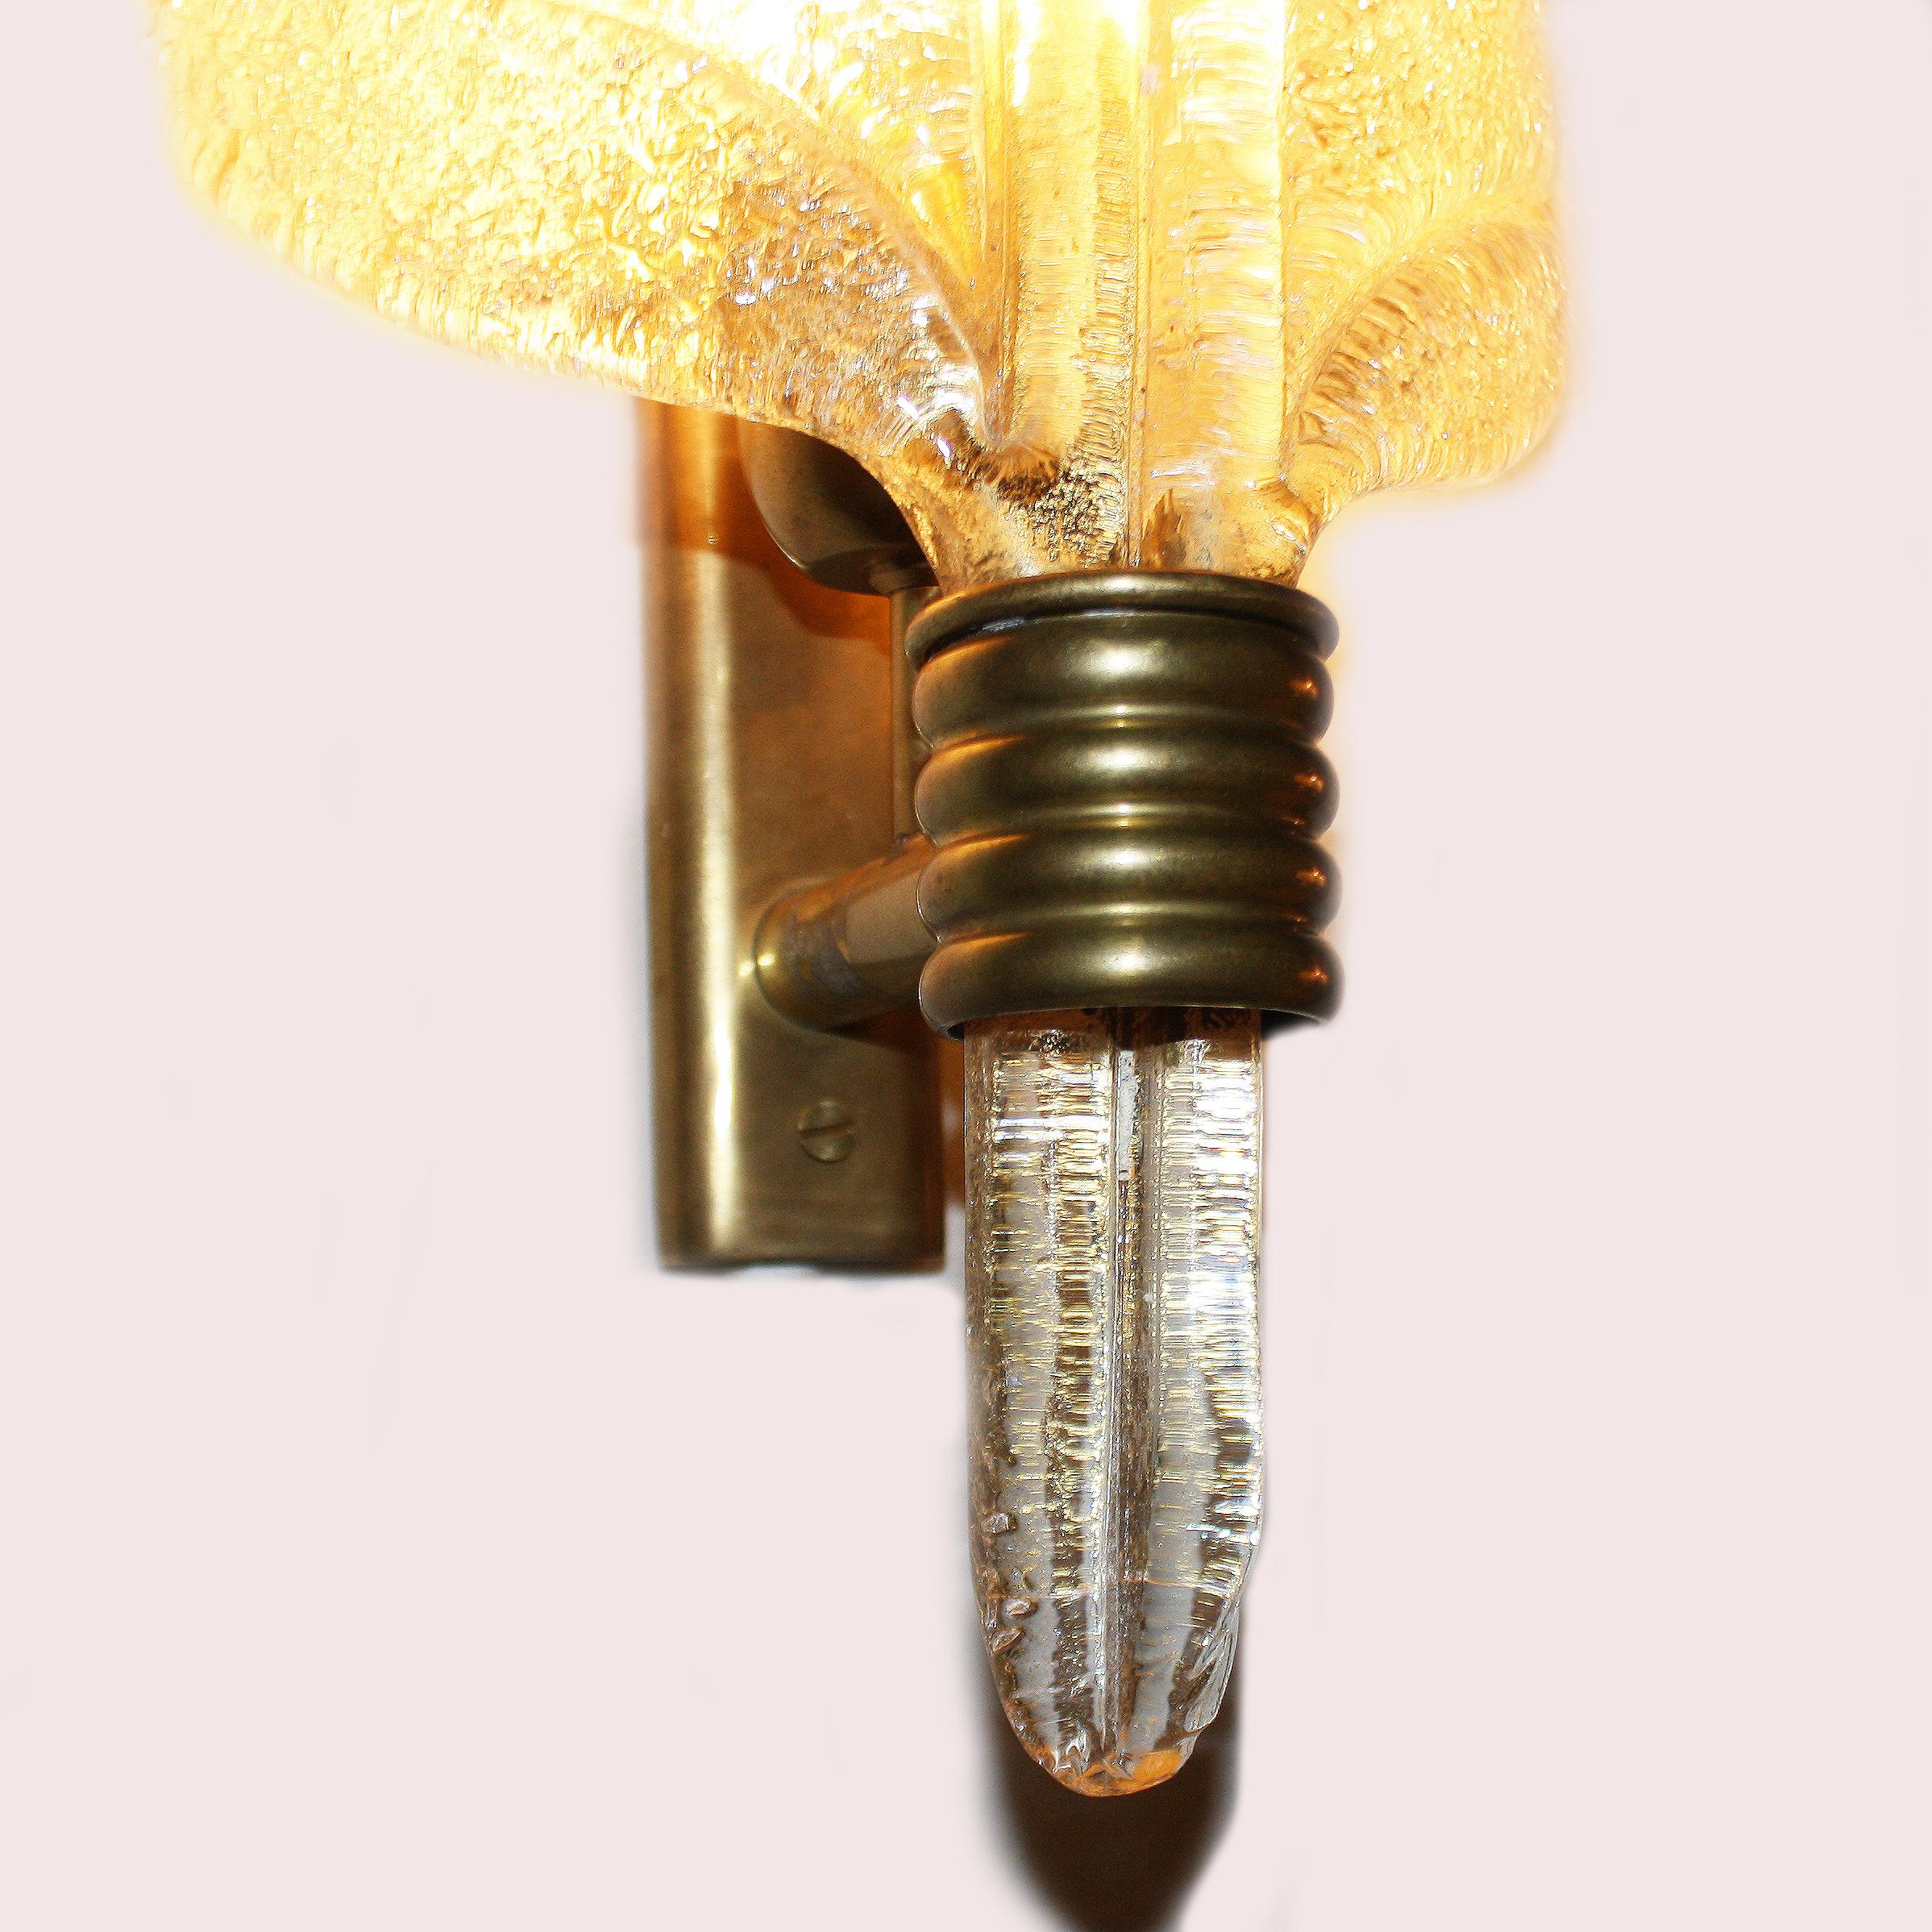 Pair of gold Murano glass feather sconces, circa 1940.
$4500.